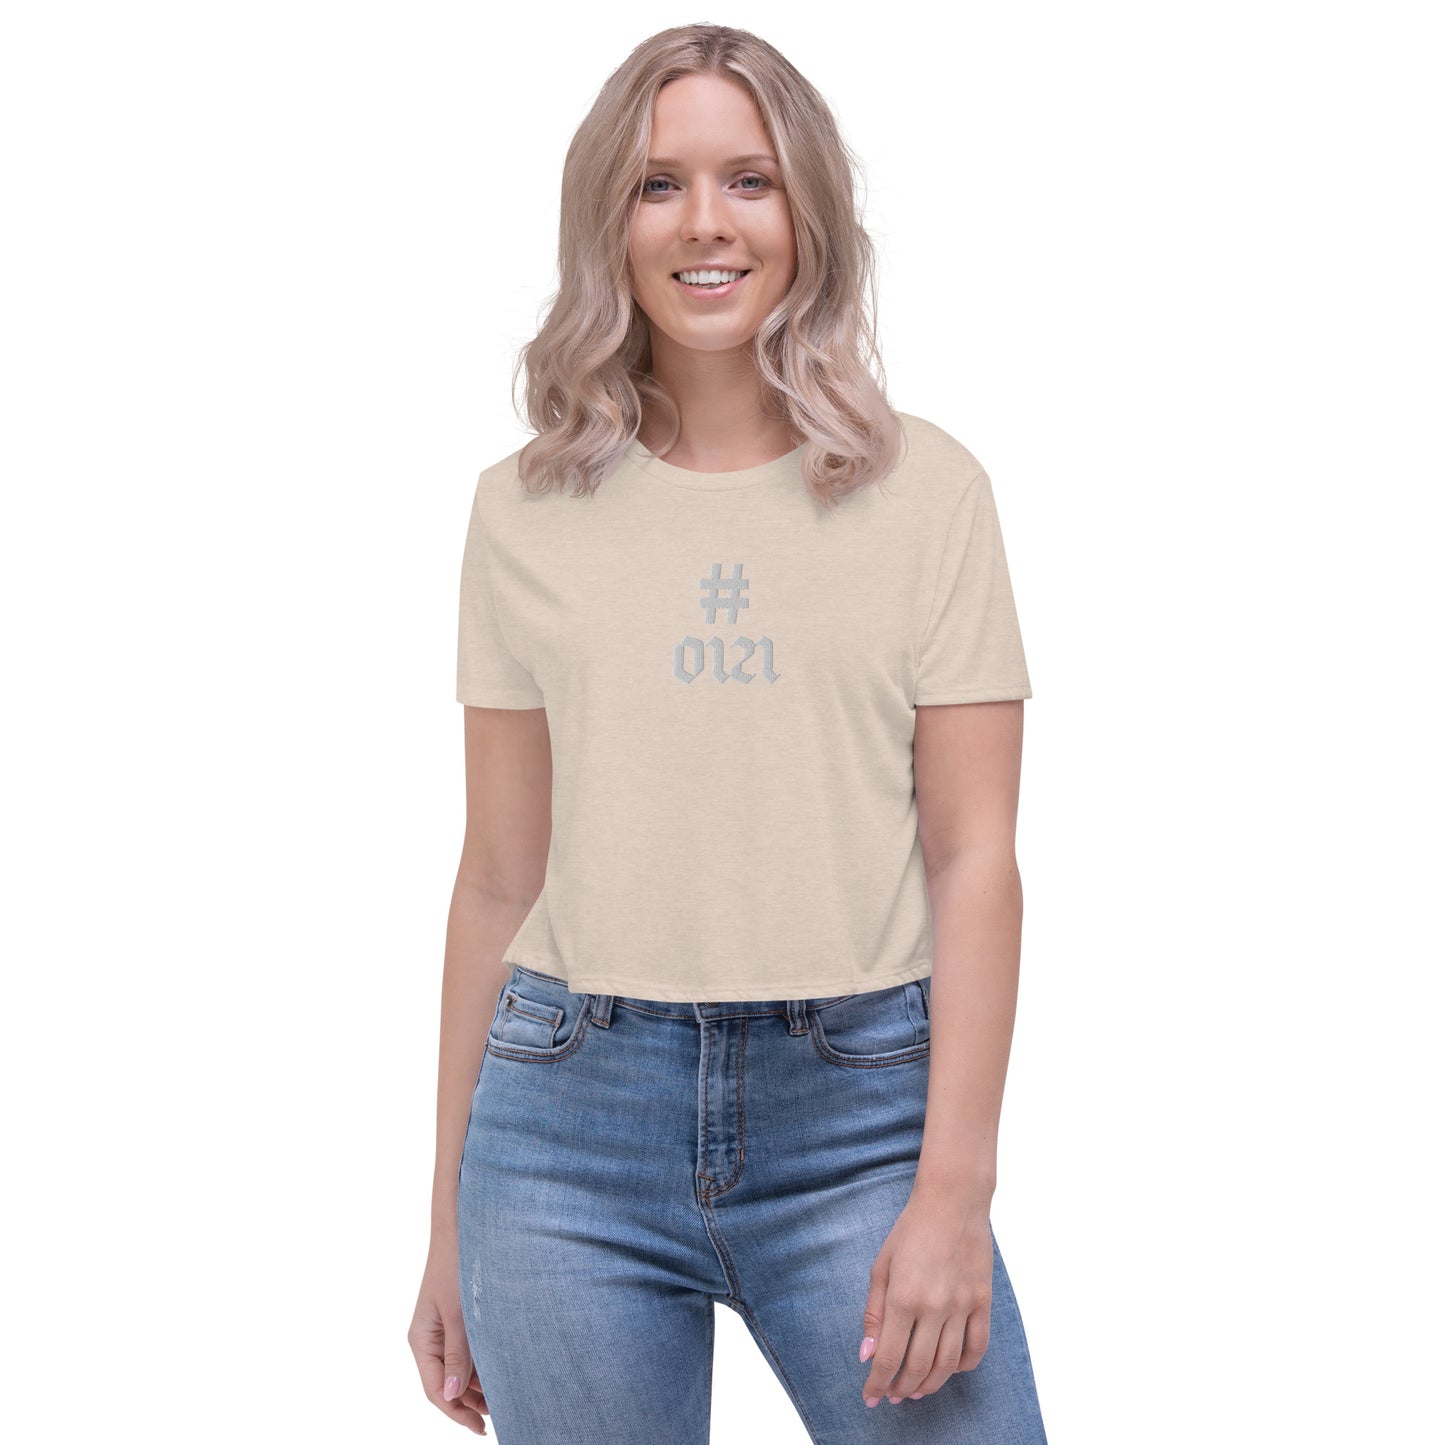 Hashtag 0121 Embroidered Crop Tee